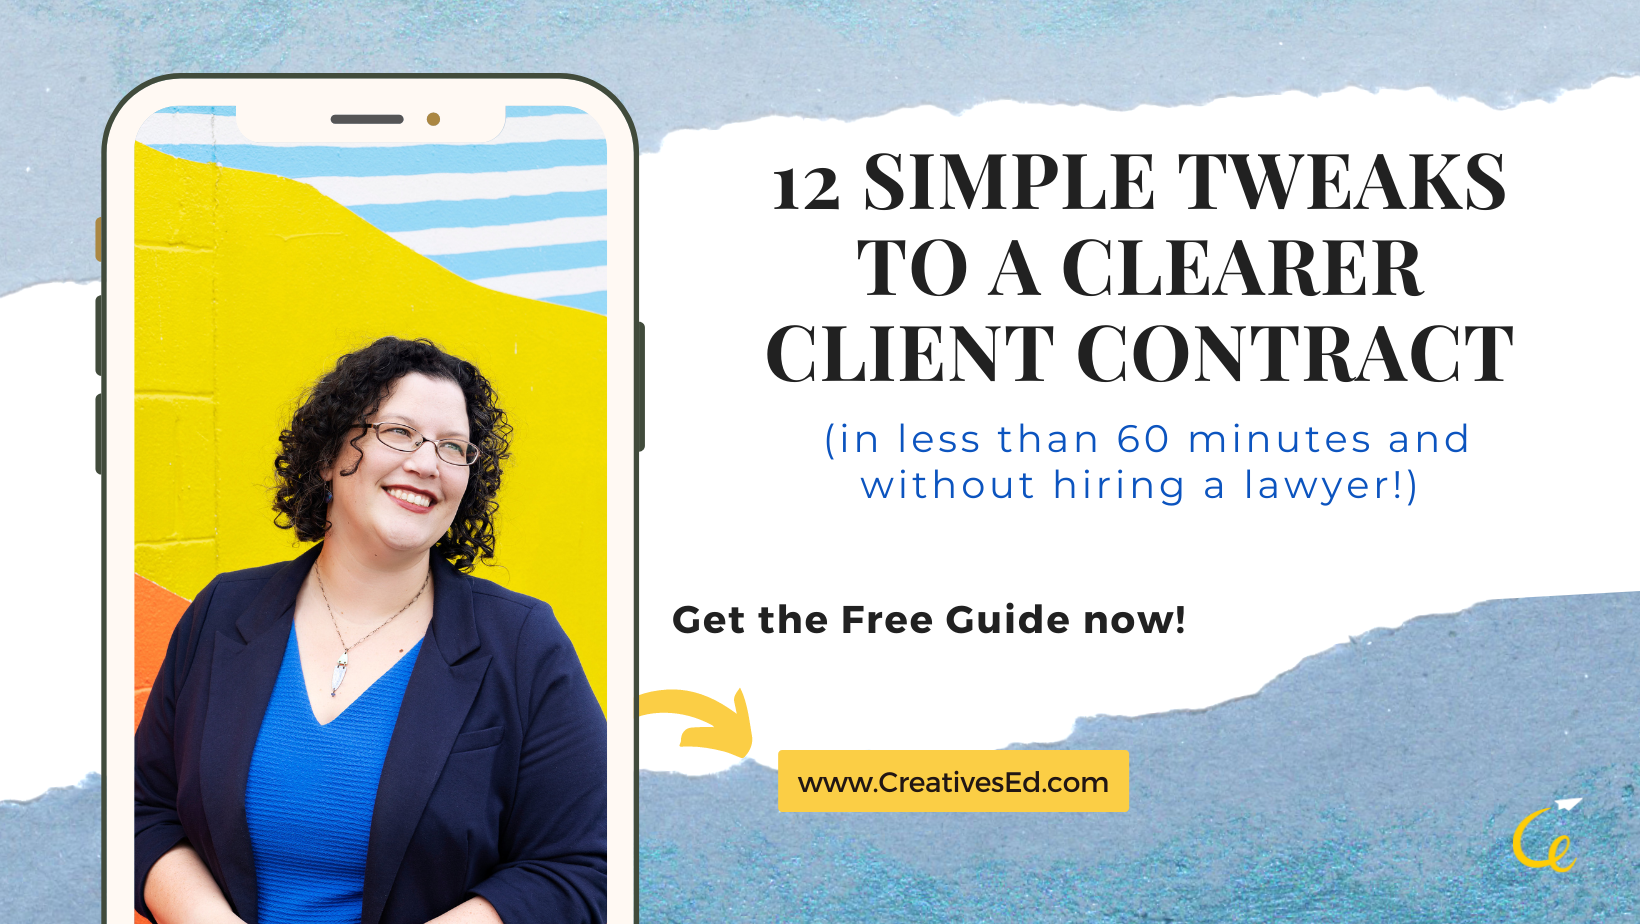 Photo of Sheila in a mockup of a cell phone, with text:12 Simple Tweaks to a Clearer Client Contract in less than 60 minutes and without hiring a lawyer! Get the free guide now at CreativesEd.com with the CreativesEd mark at the bottom right